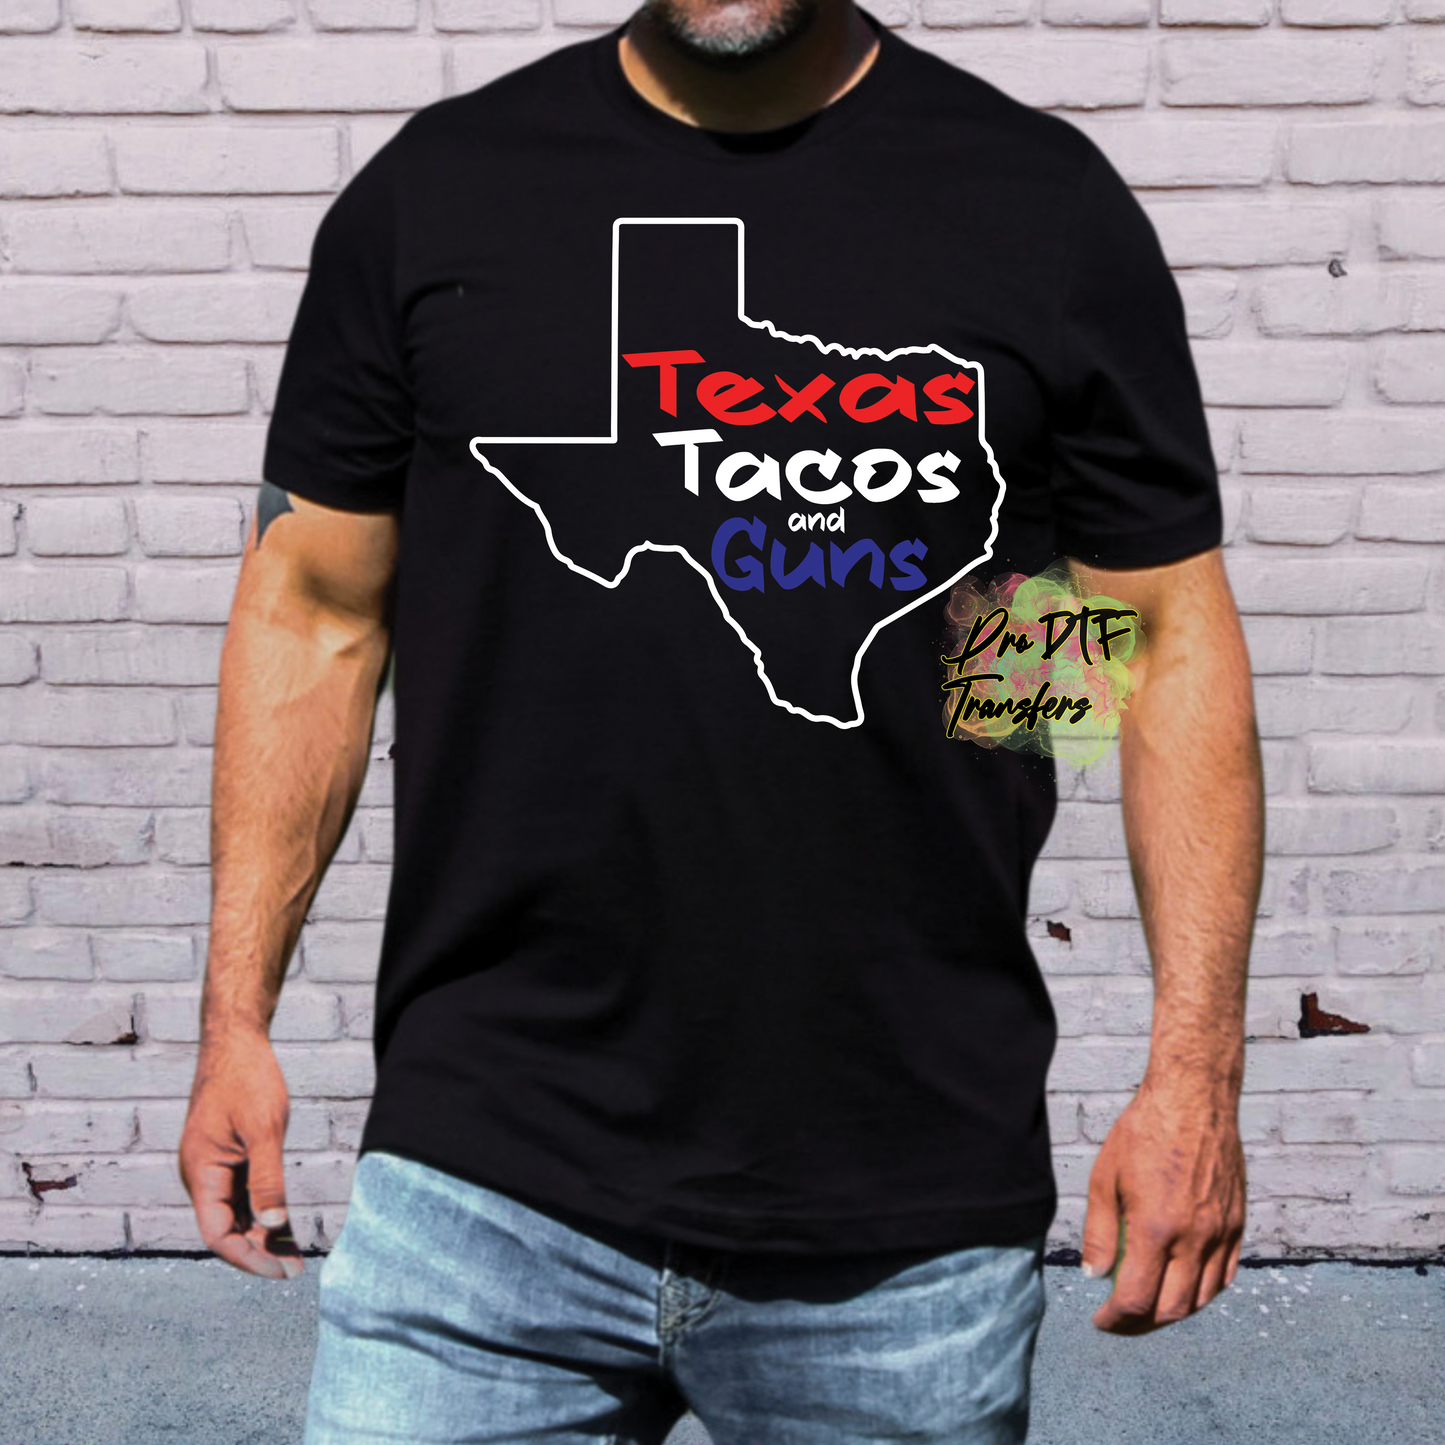 HT26 Texas Tacos and Guns Full Color DTF Transfer - Pro DTF Transfers